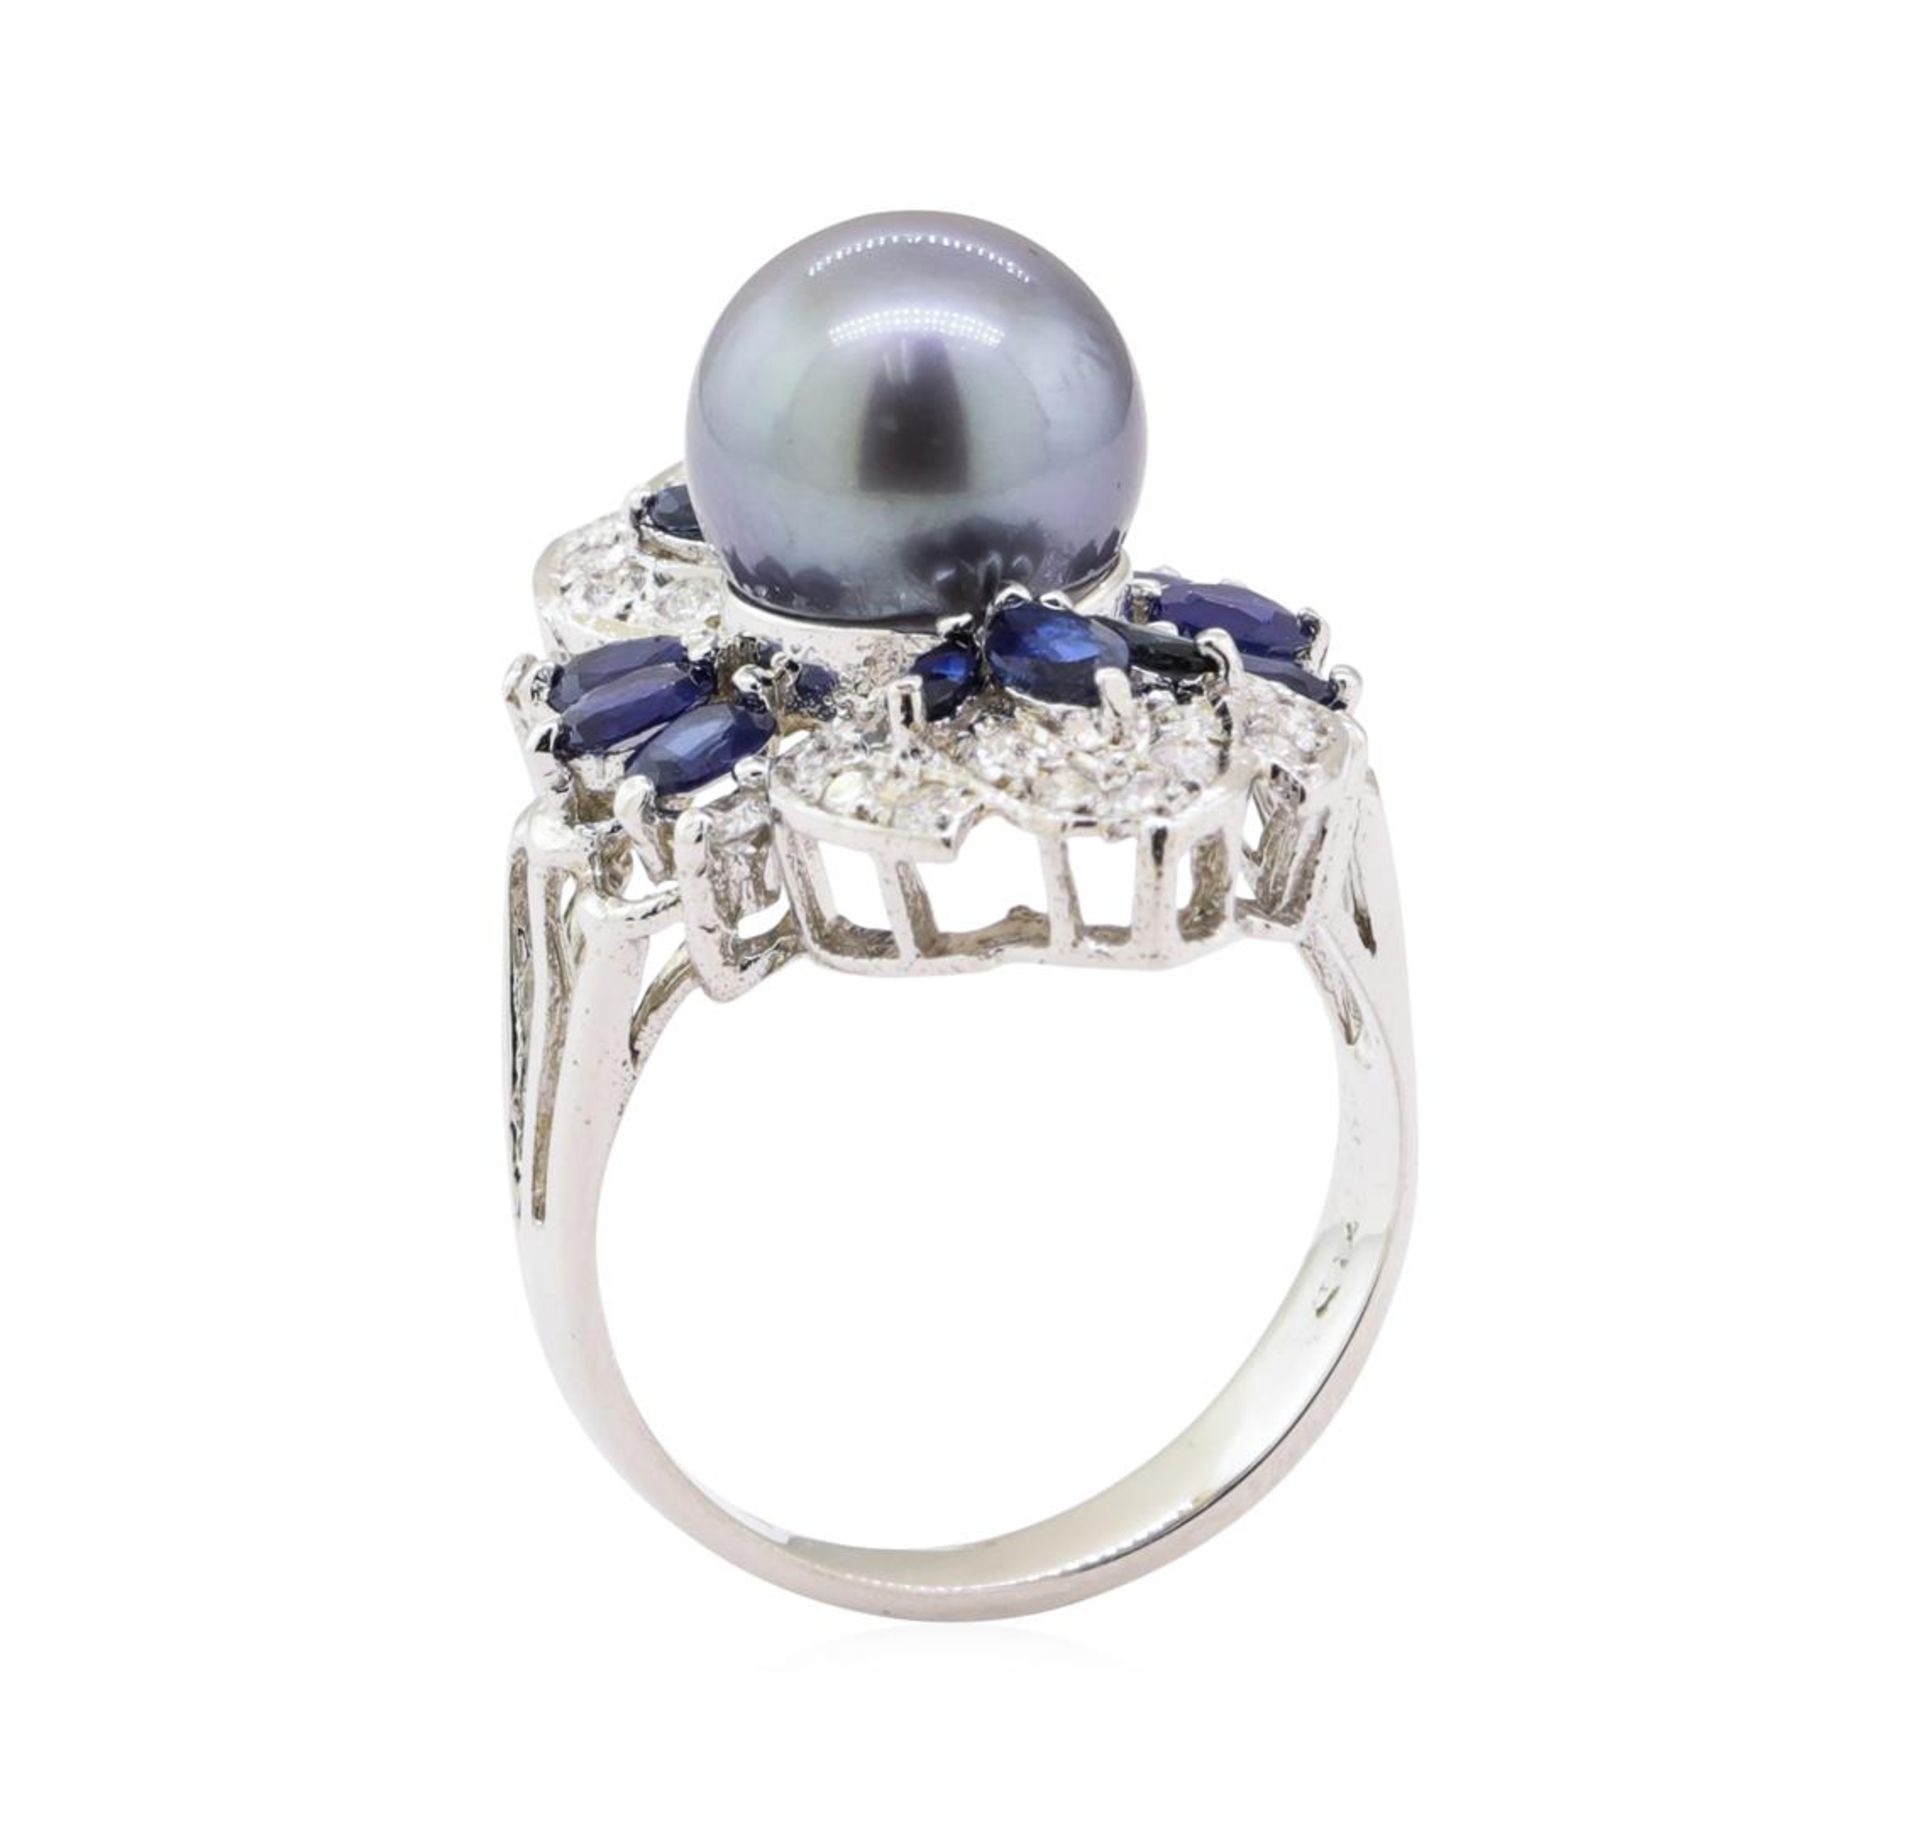 Pearl, Sapphire and Diamond Ring - 14KT White Gold - Image 4 of 5